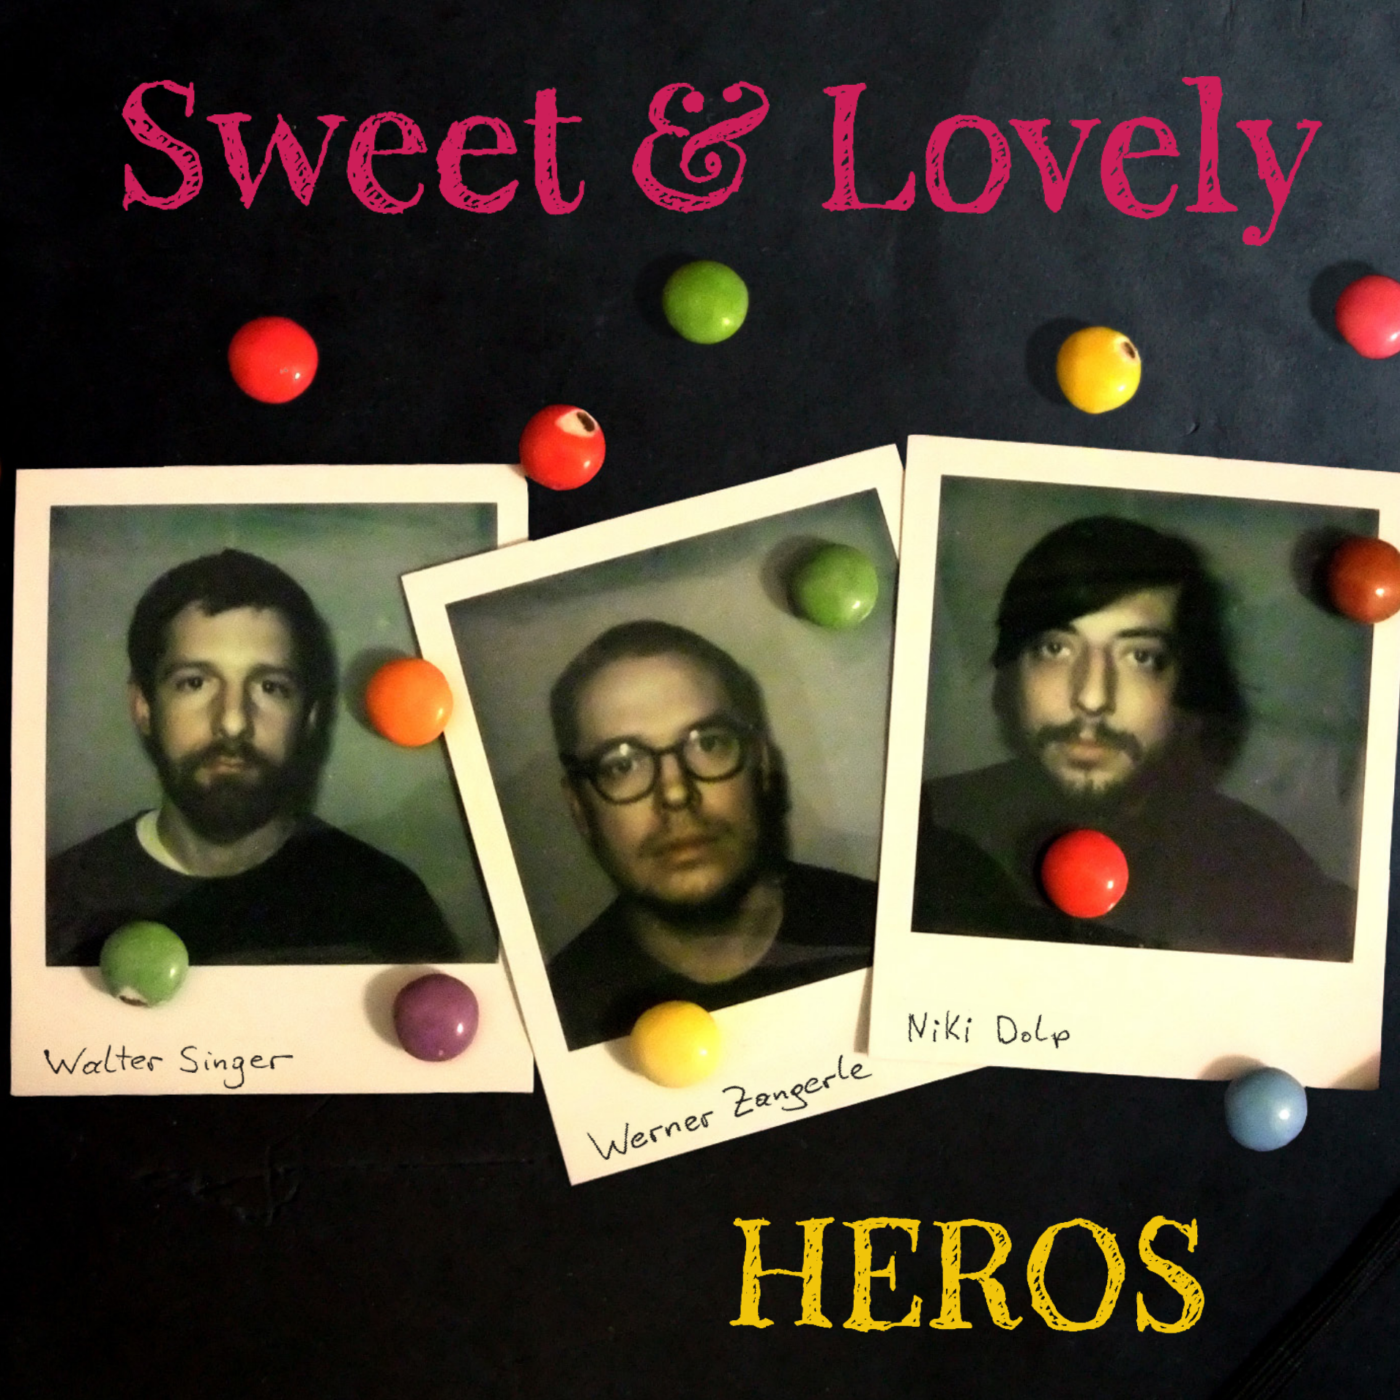 Sweet & Lovely “Heros” out now!